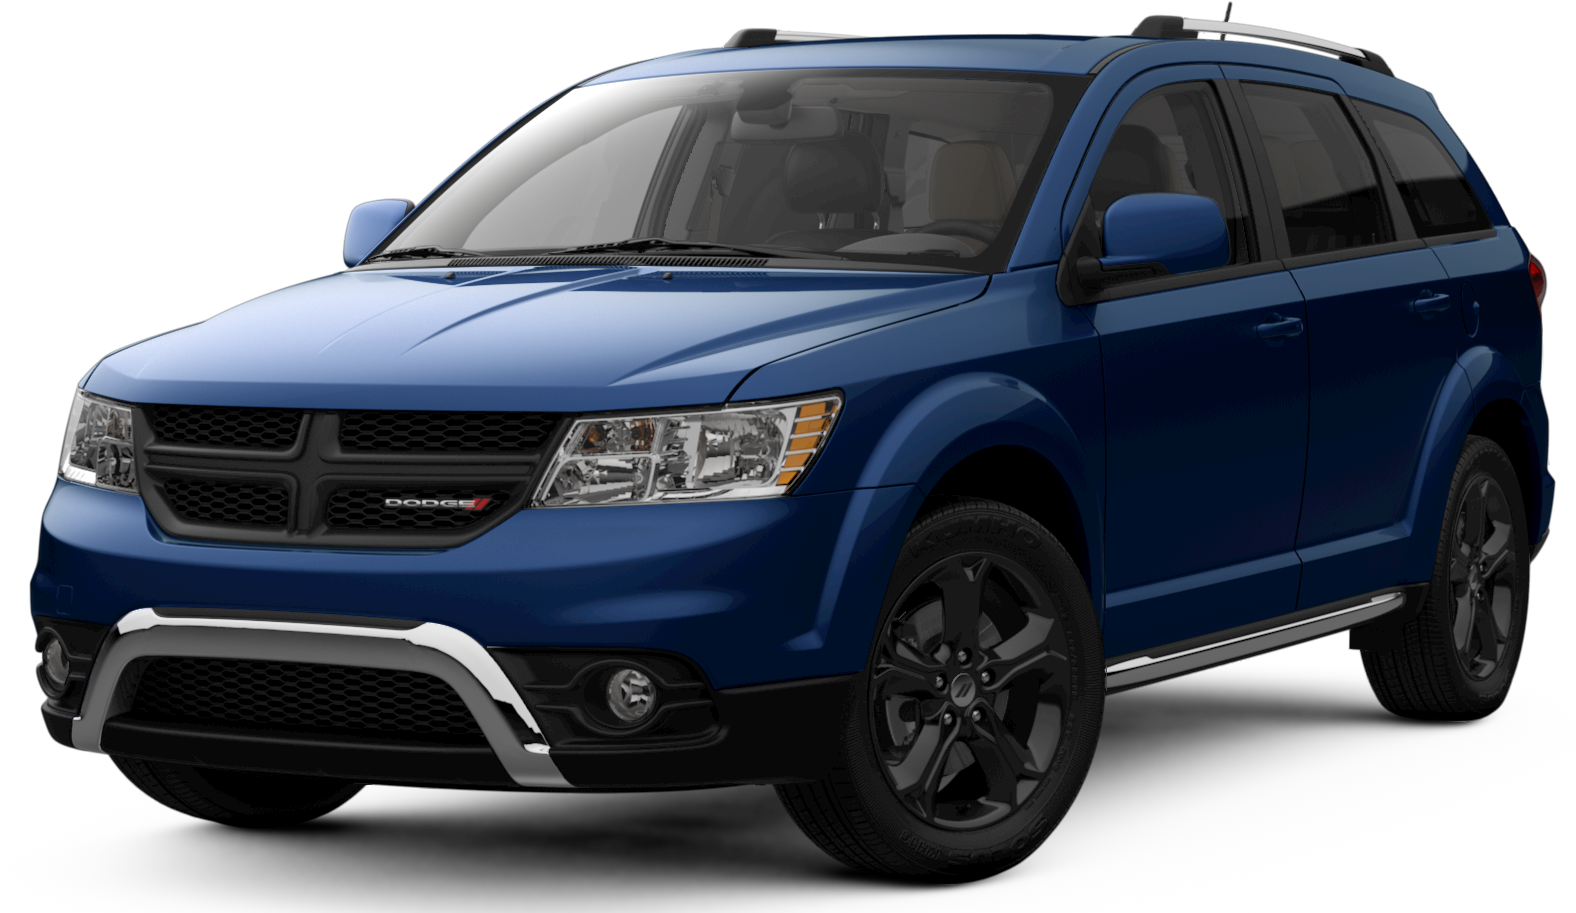 2018 Dodge Journey Incentives, Specials & Offers in Lawrenceburg IN